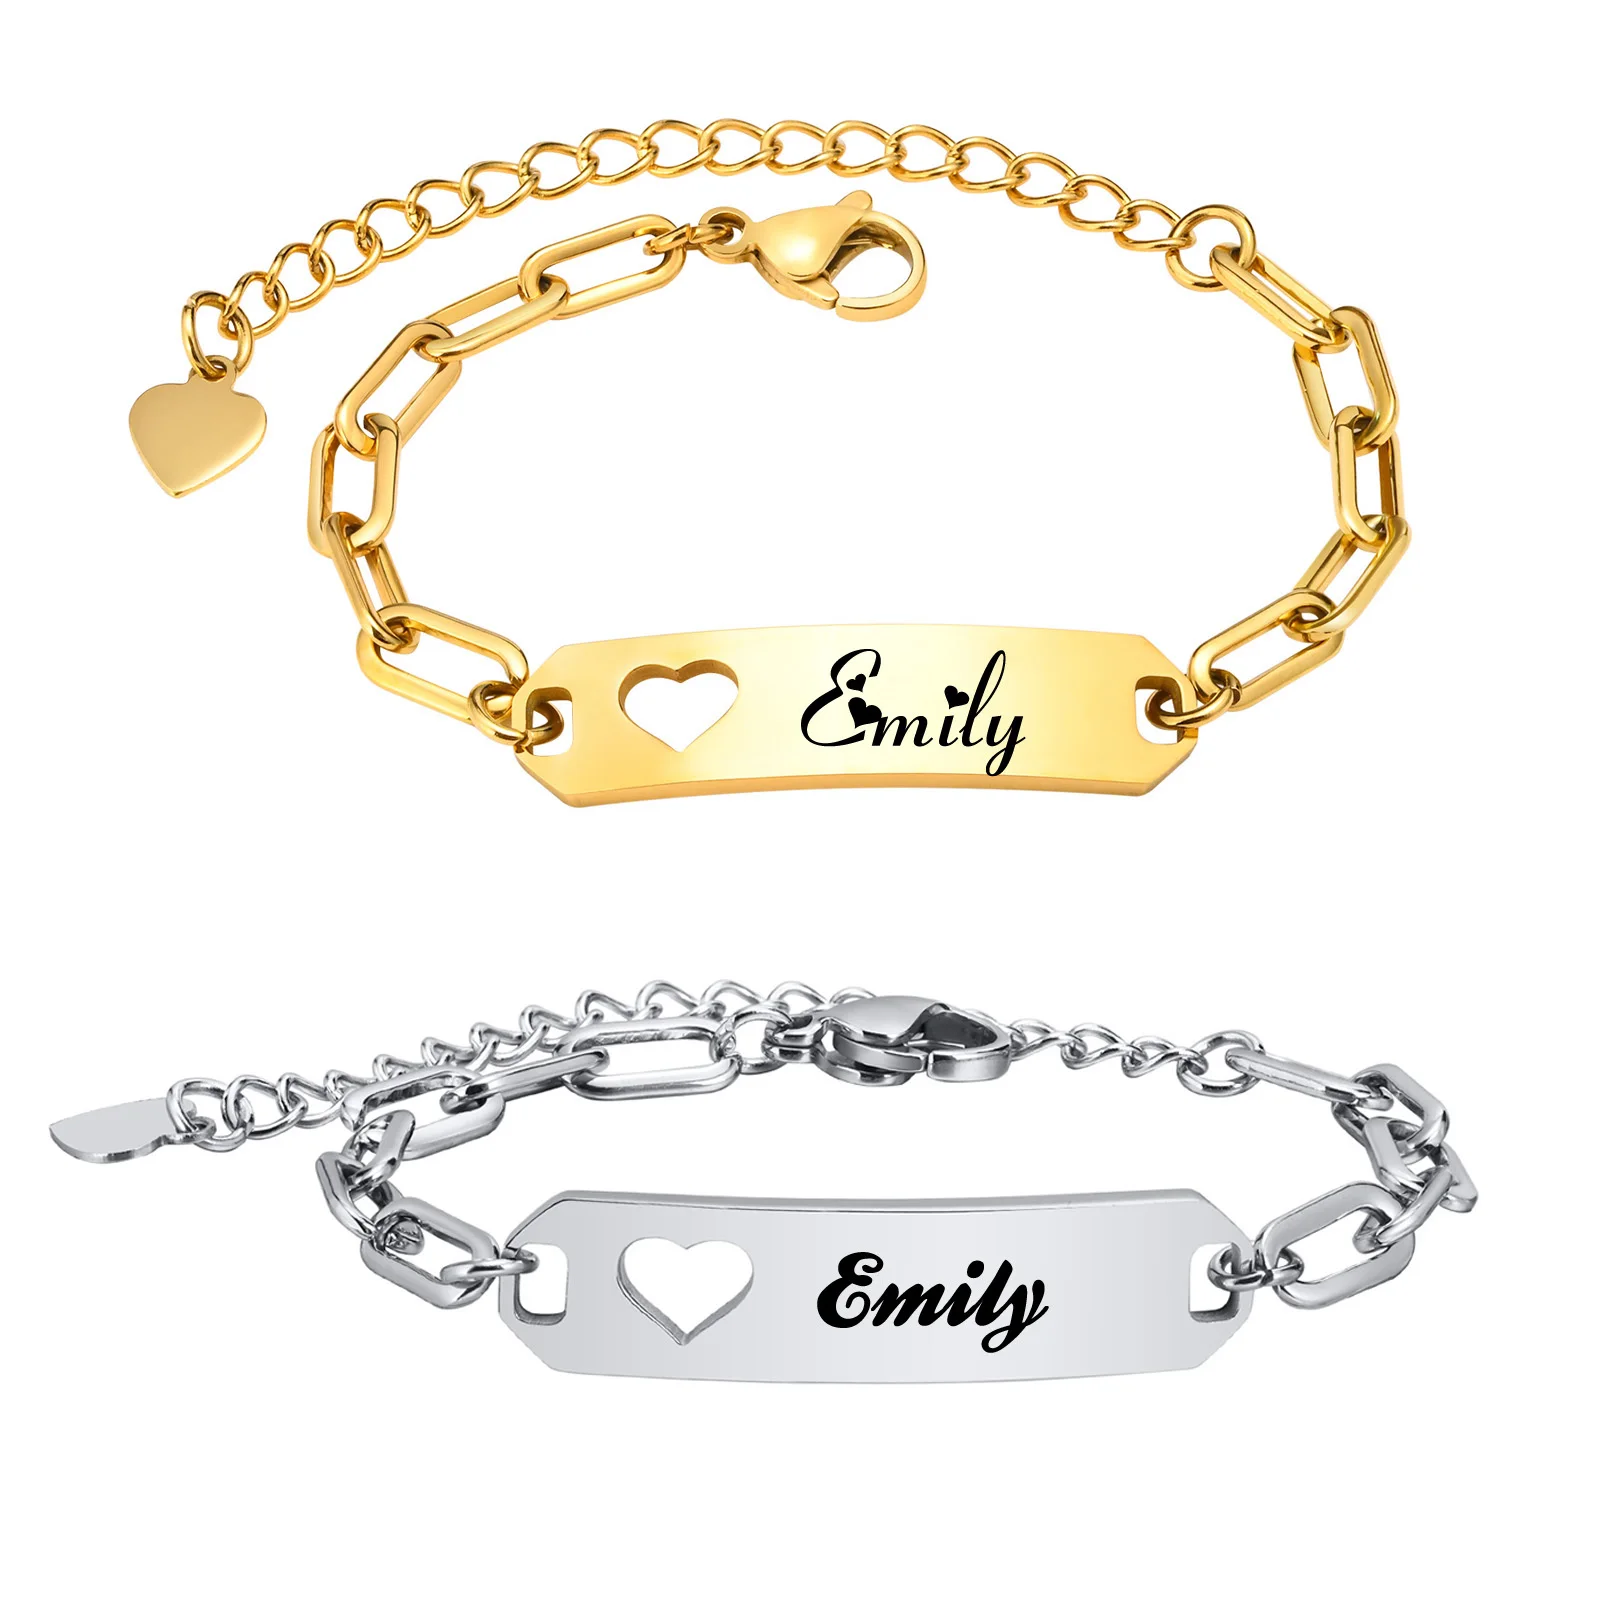 Engraved Custom Baby Name ID Bracelet With Heart, Stainless Steel Personalized Jewelry for New Born Children Birthday Gift